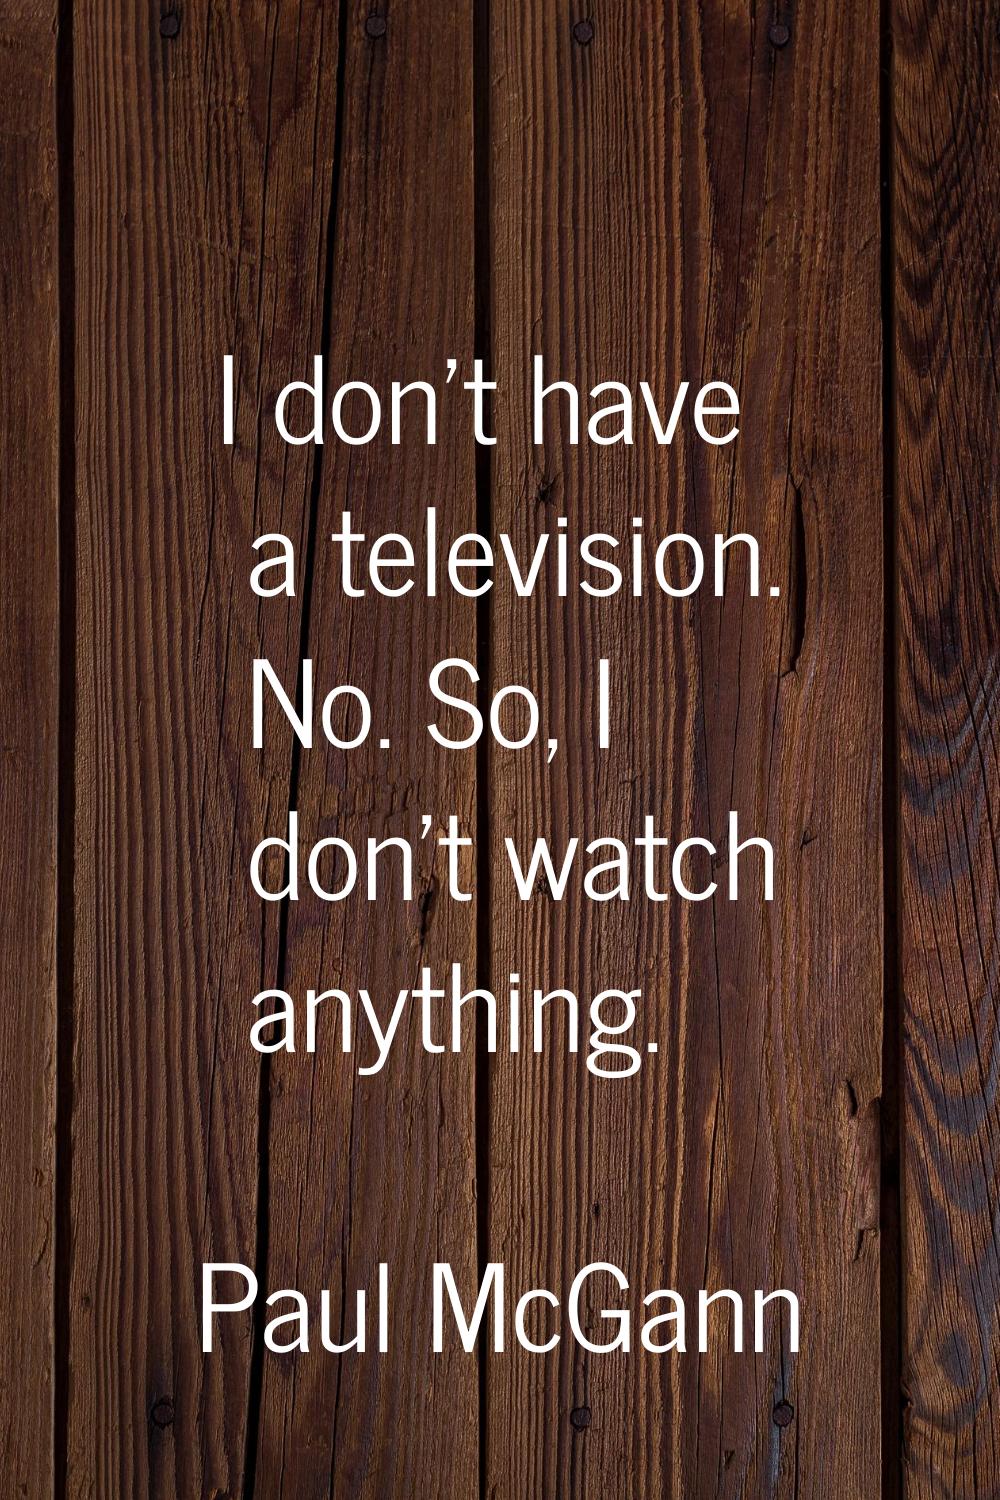 I don't have a television. No. So, I don't watch anything.